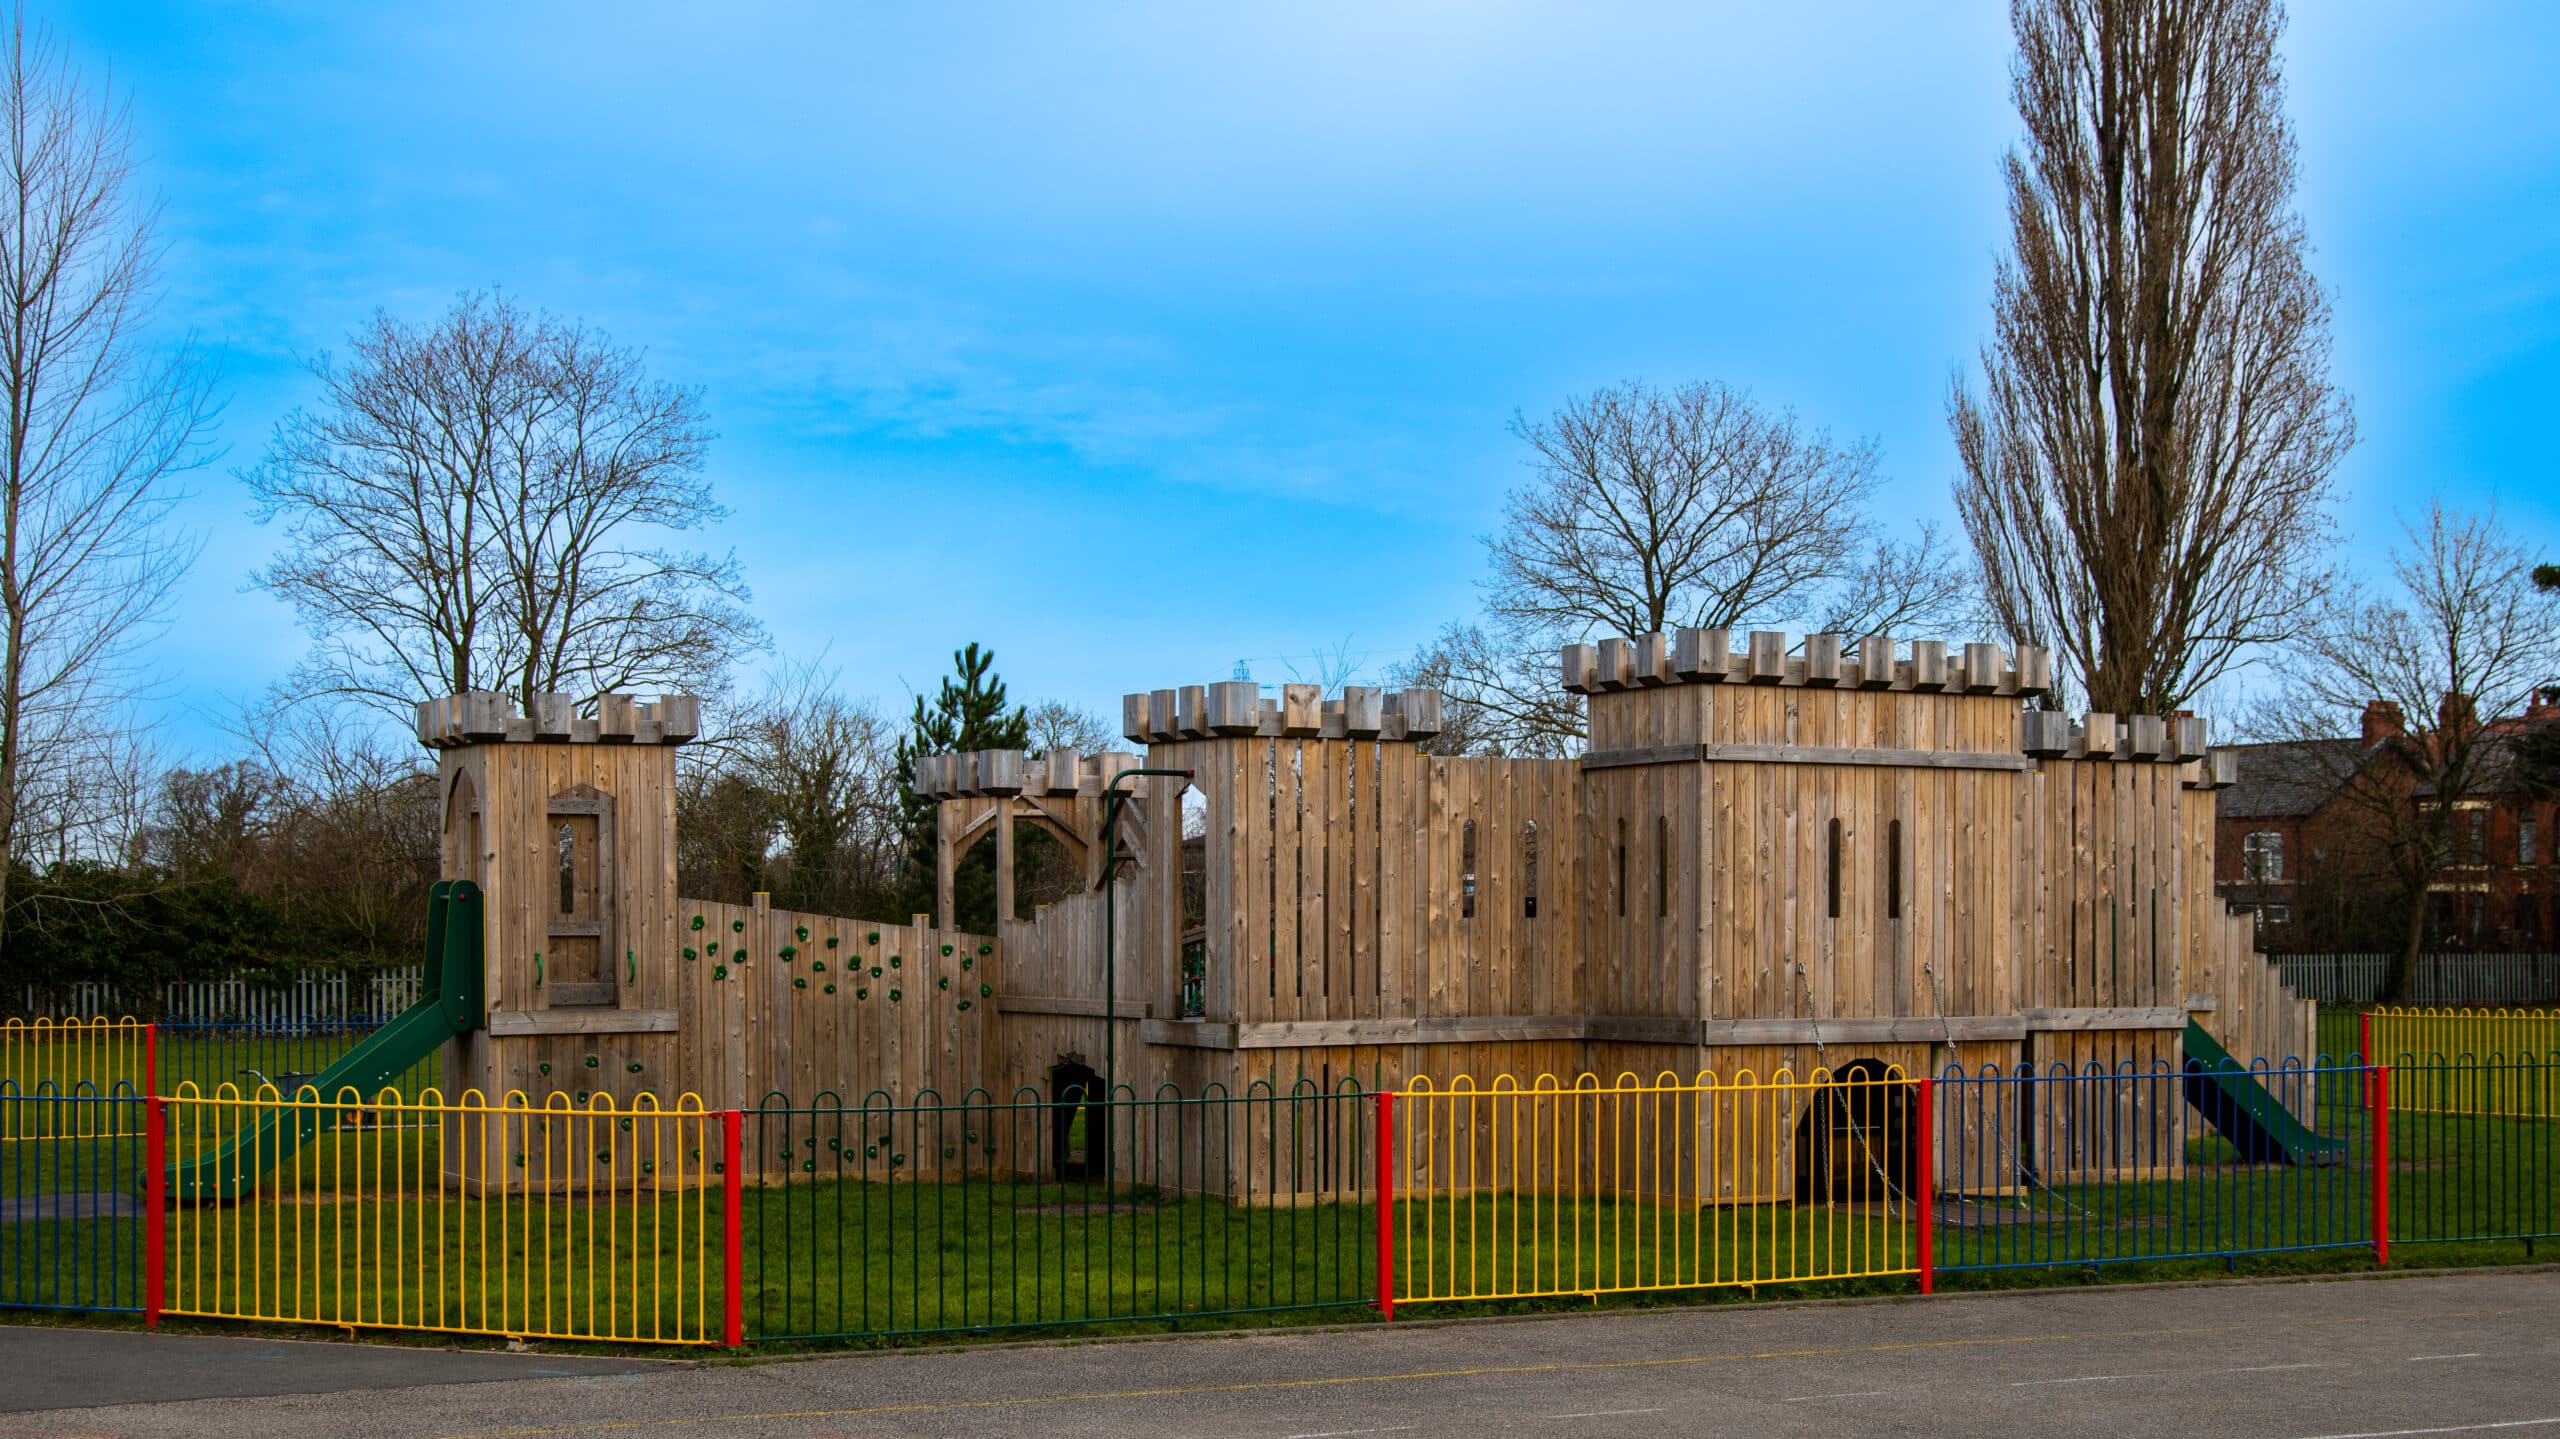 A wooden playground castle with a colourful metal fence in the foreground